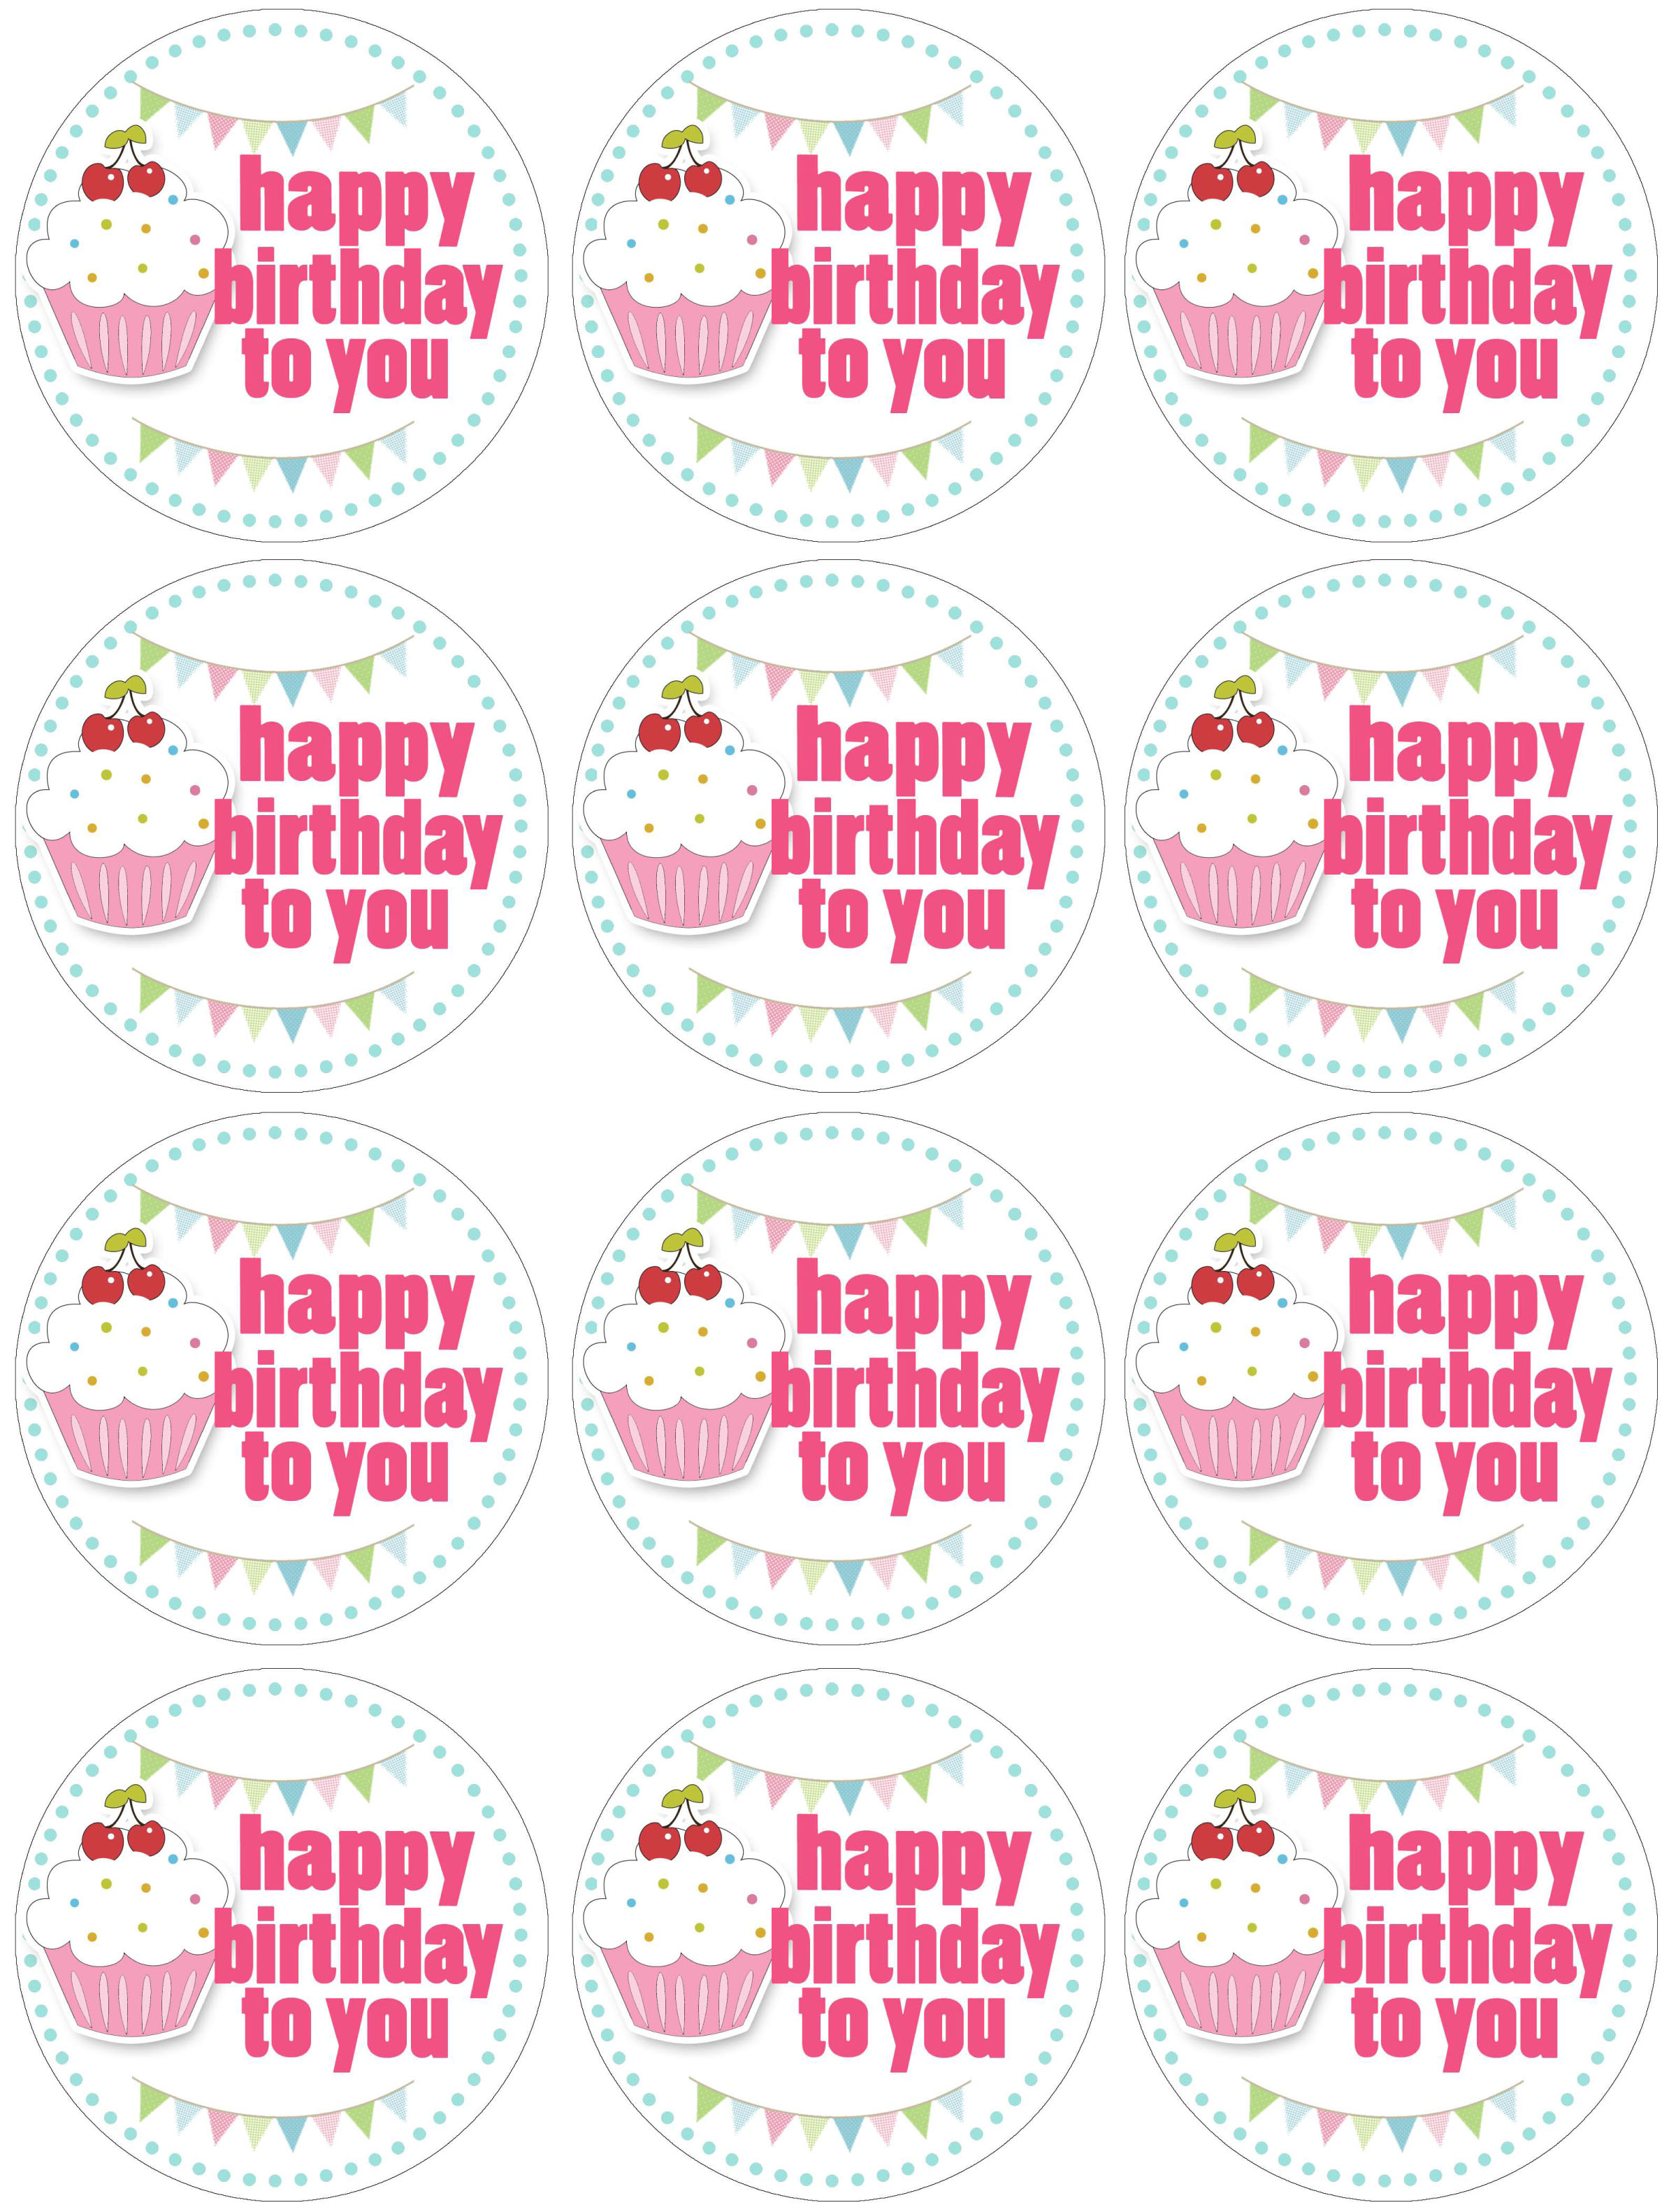 7 Best Images of Cupcake Party Printables Free Birthday Cupcake